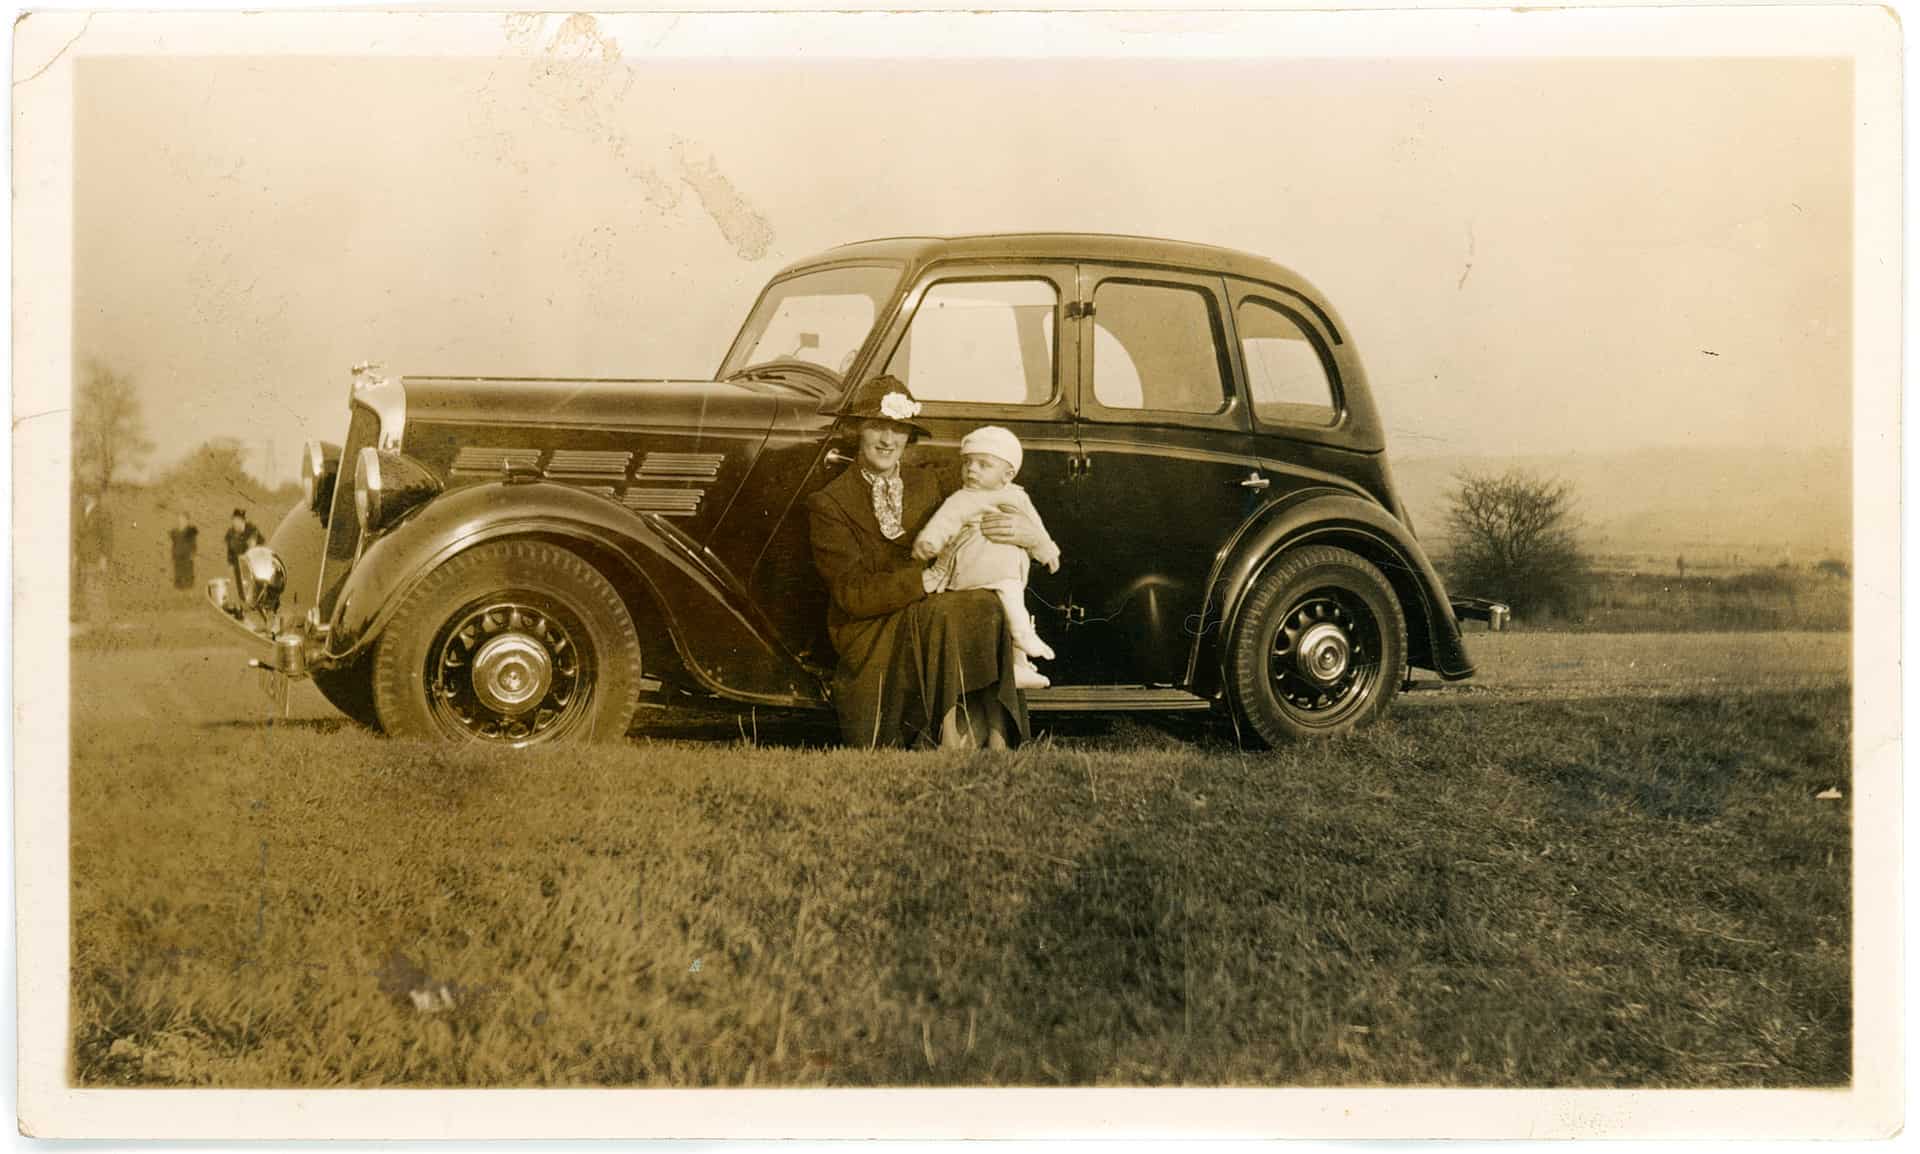 Myself and my mother – probably 1938